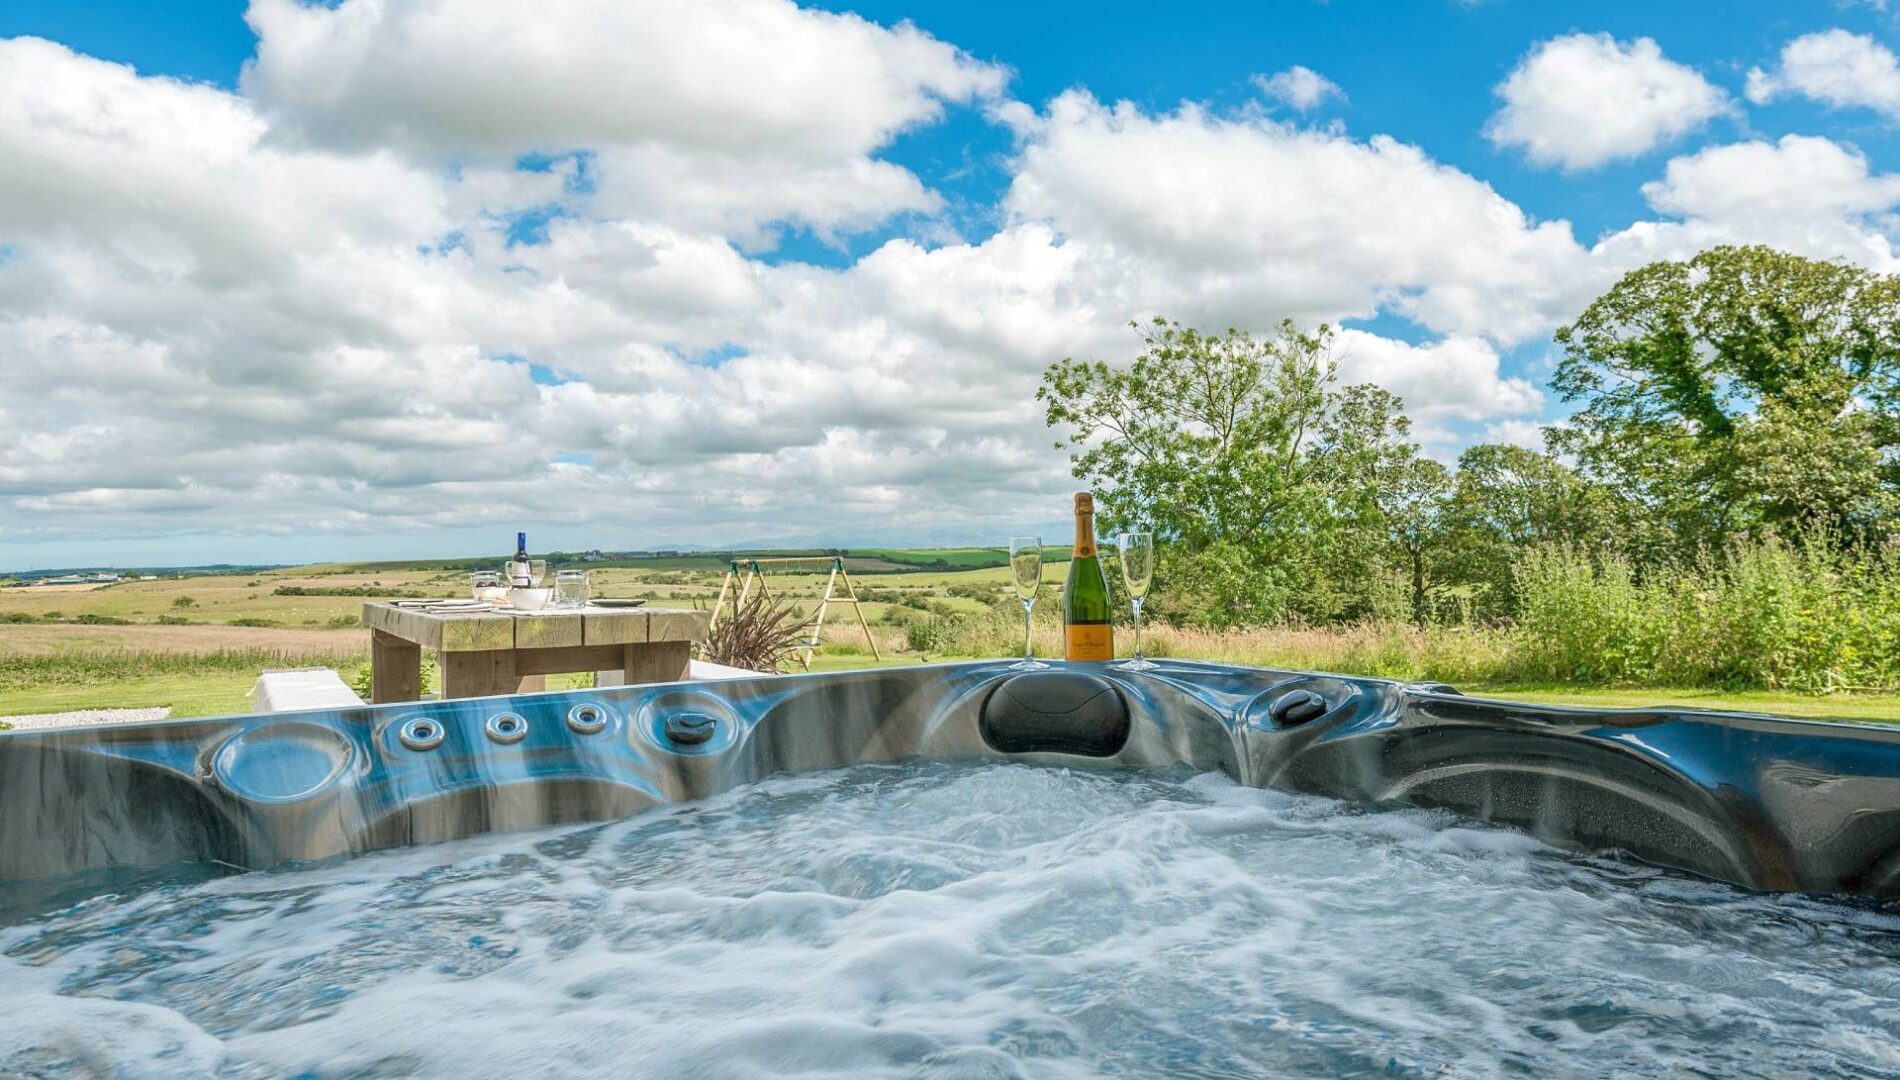 A hot tub with views over the countryside